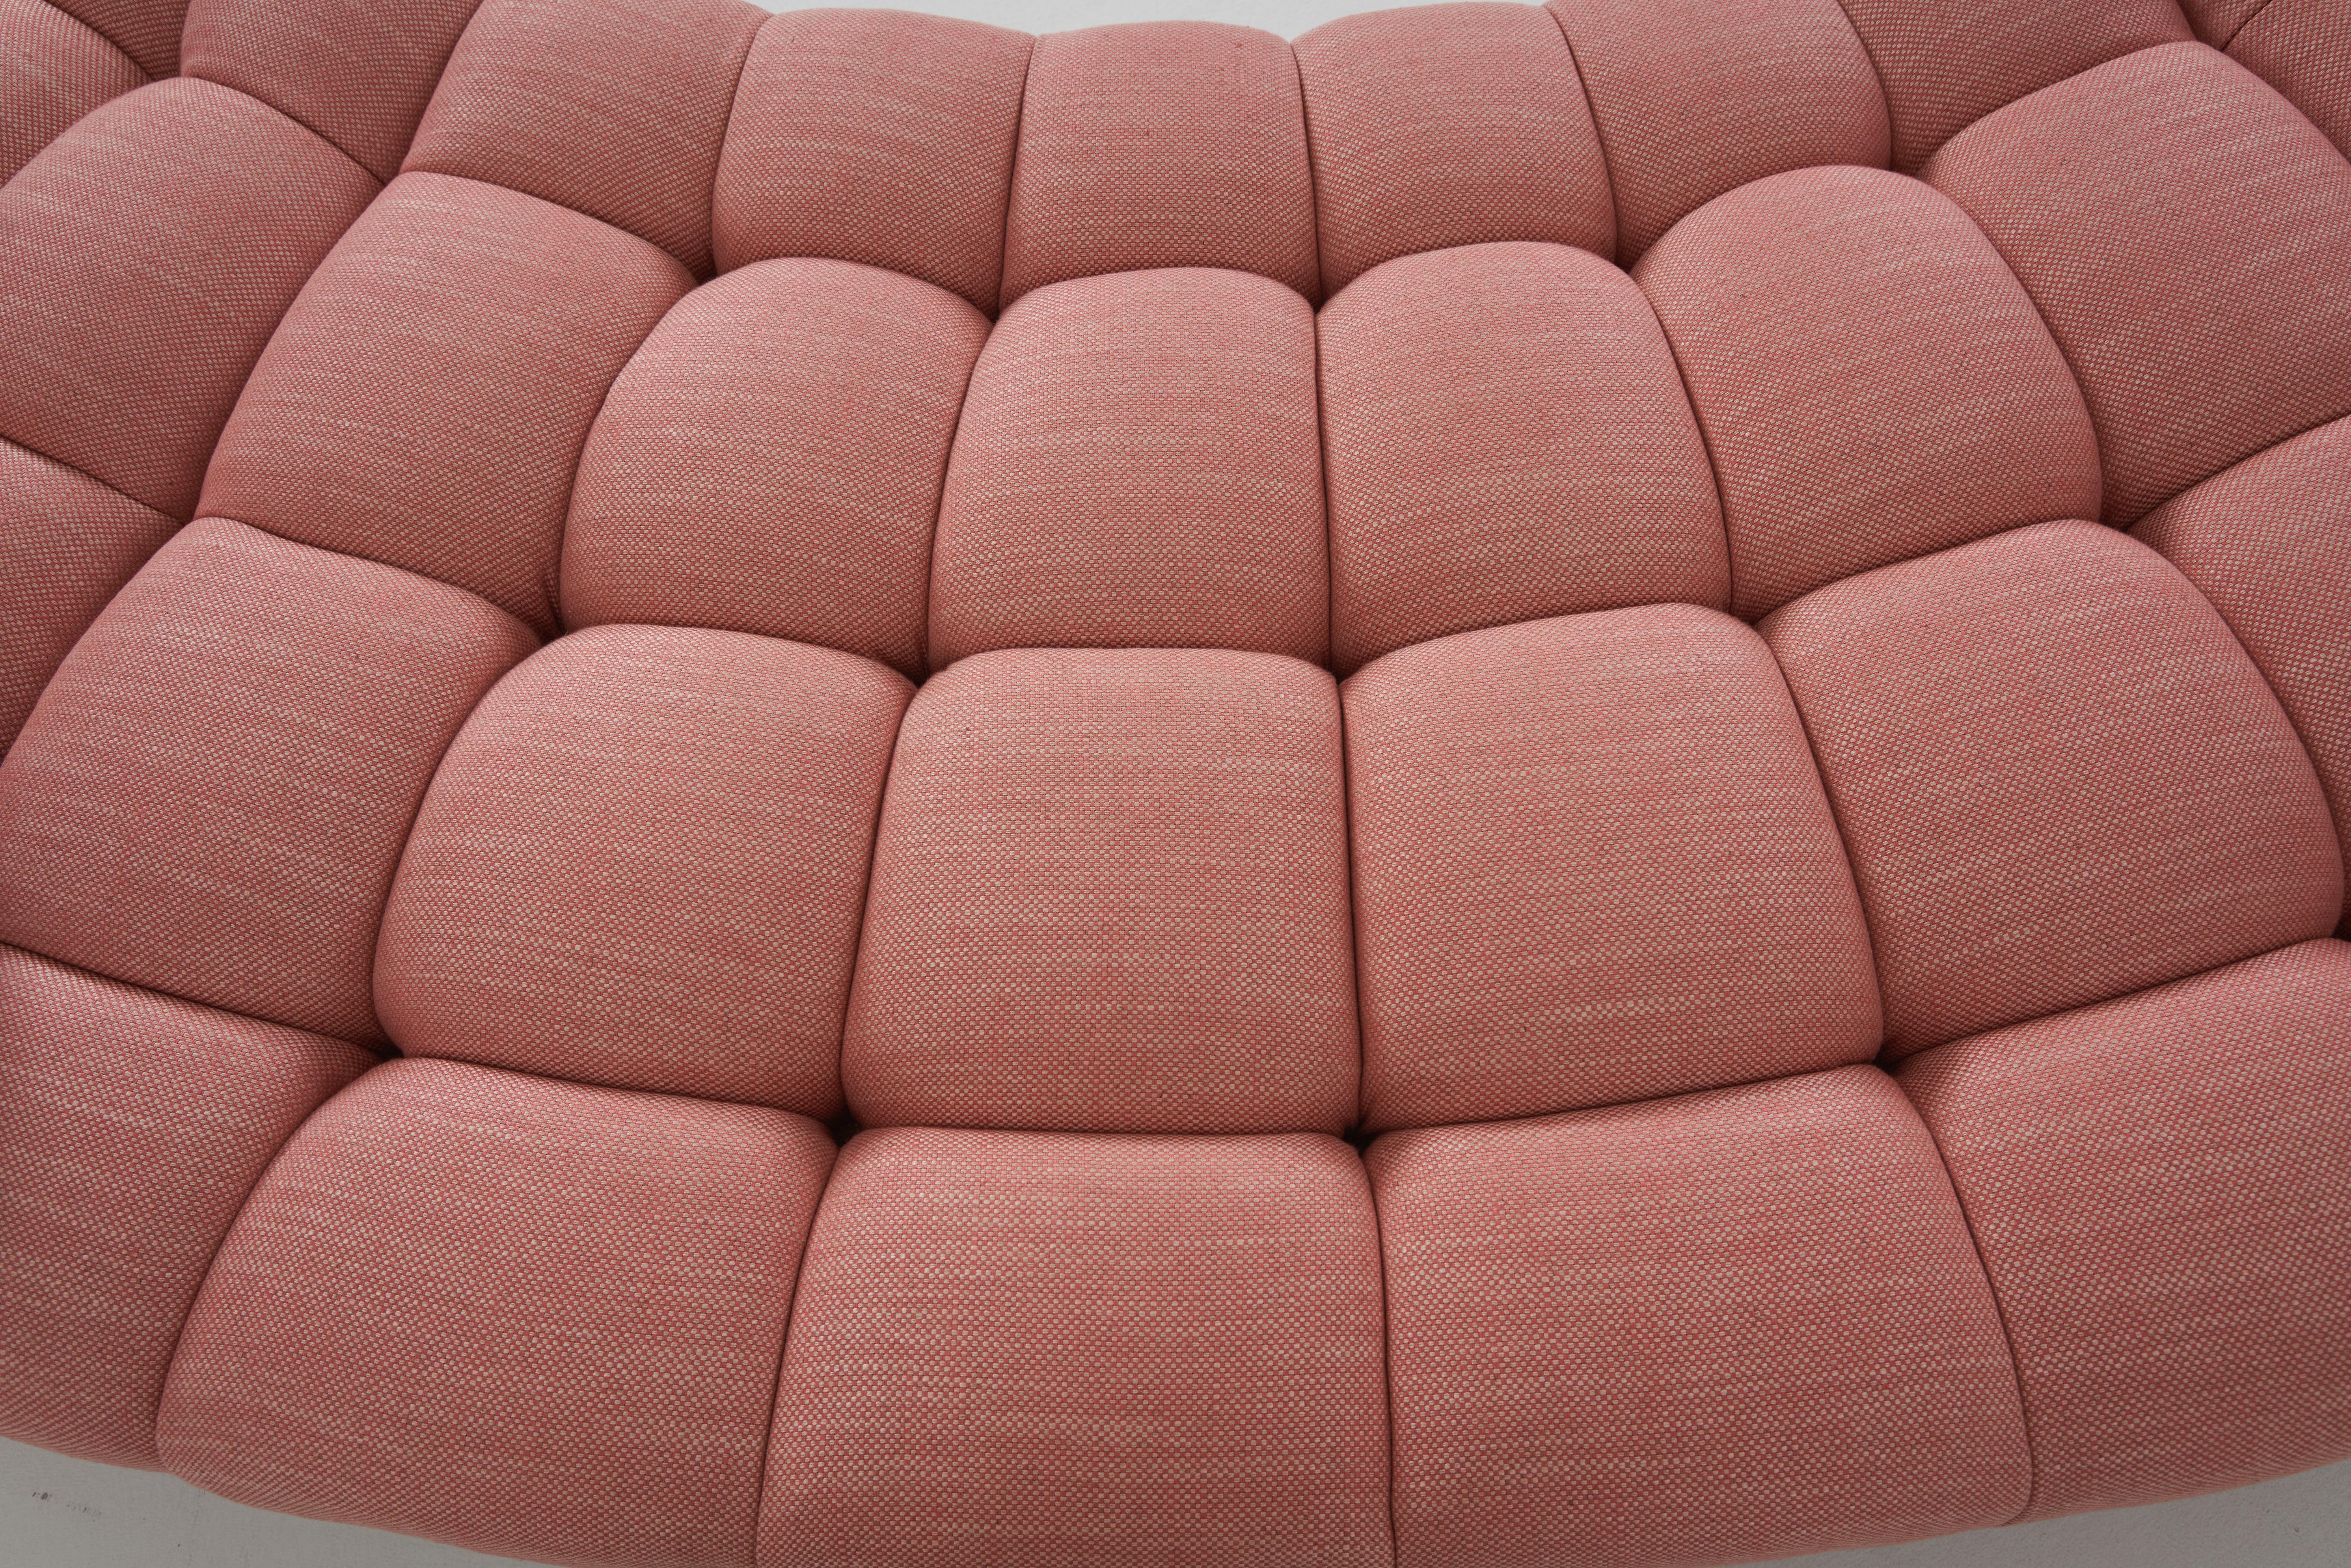 Biscuit Tufted, Guava Colored, Curved Three Piece Sectional by William Haines 2